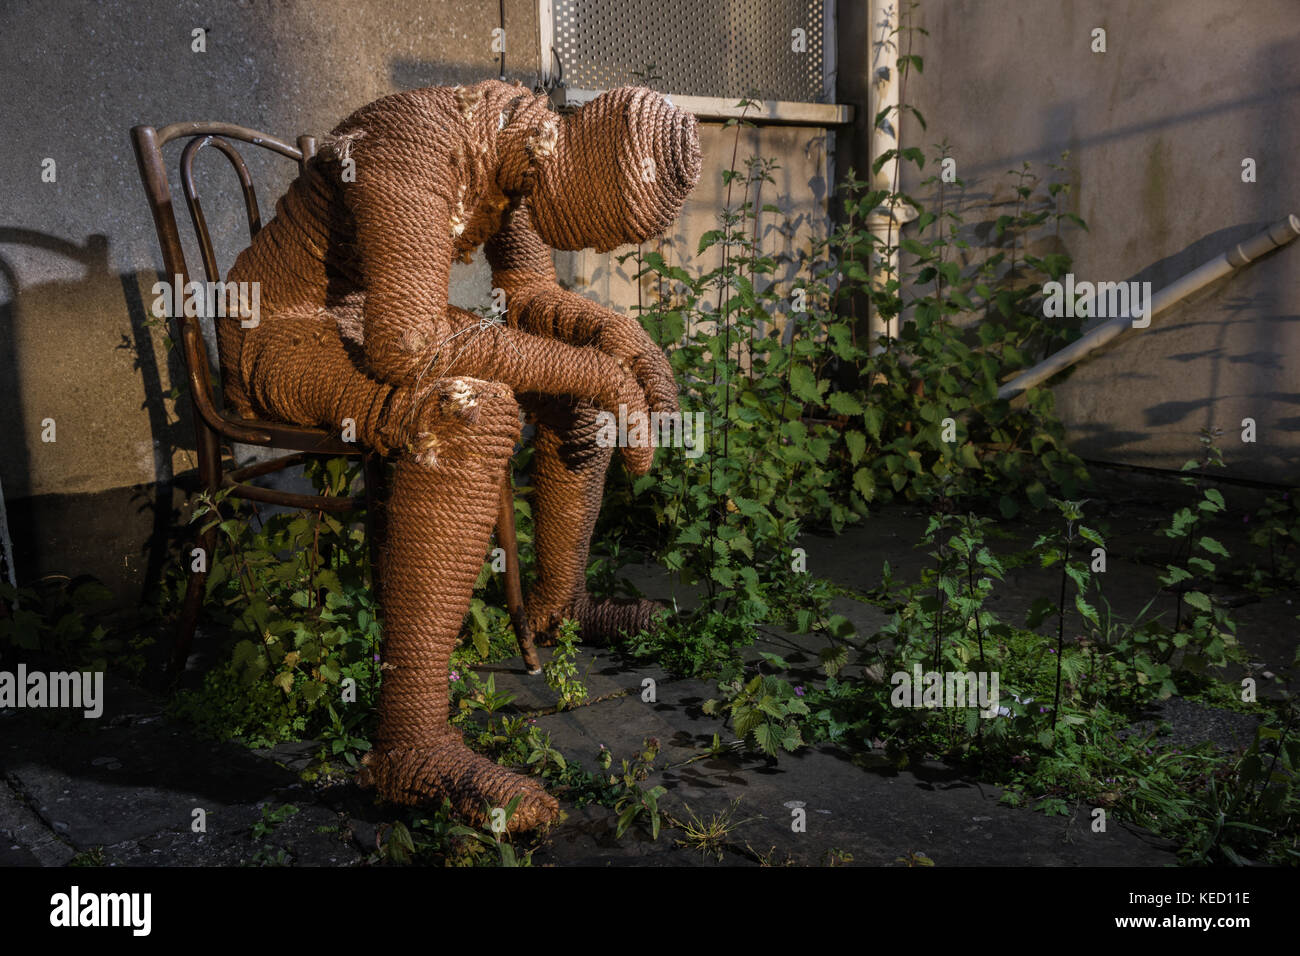 A figure made of rope sitting on a chair in a weedy concrete garden. Stock Photo